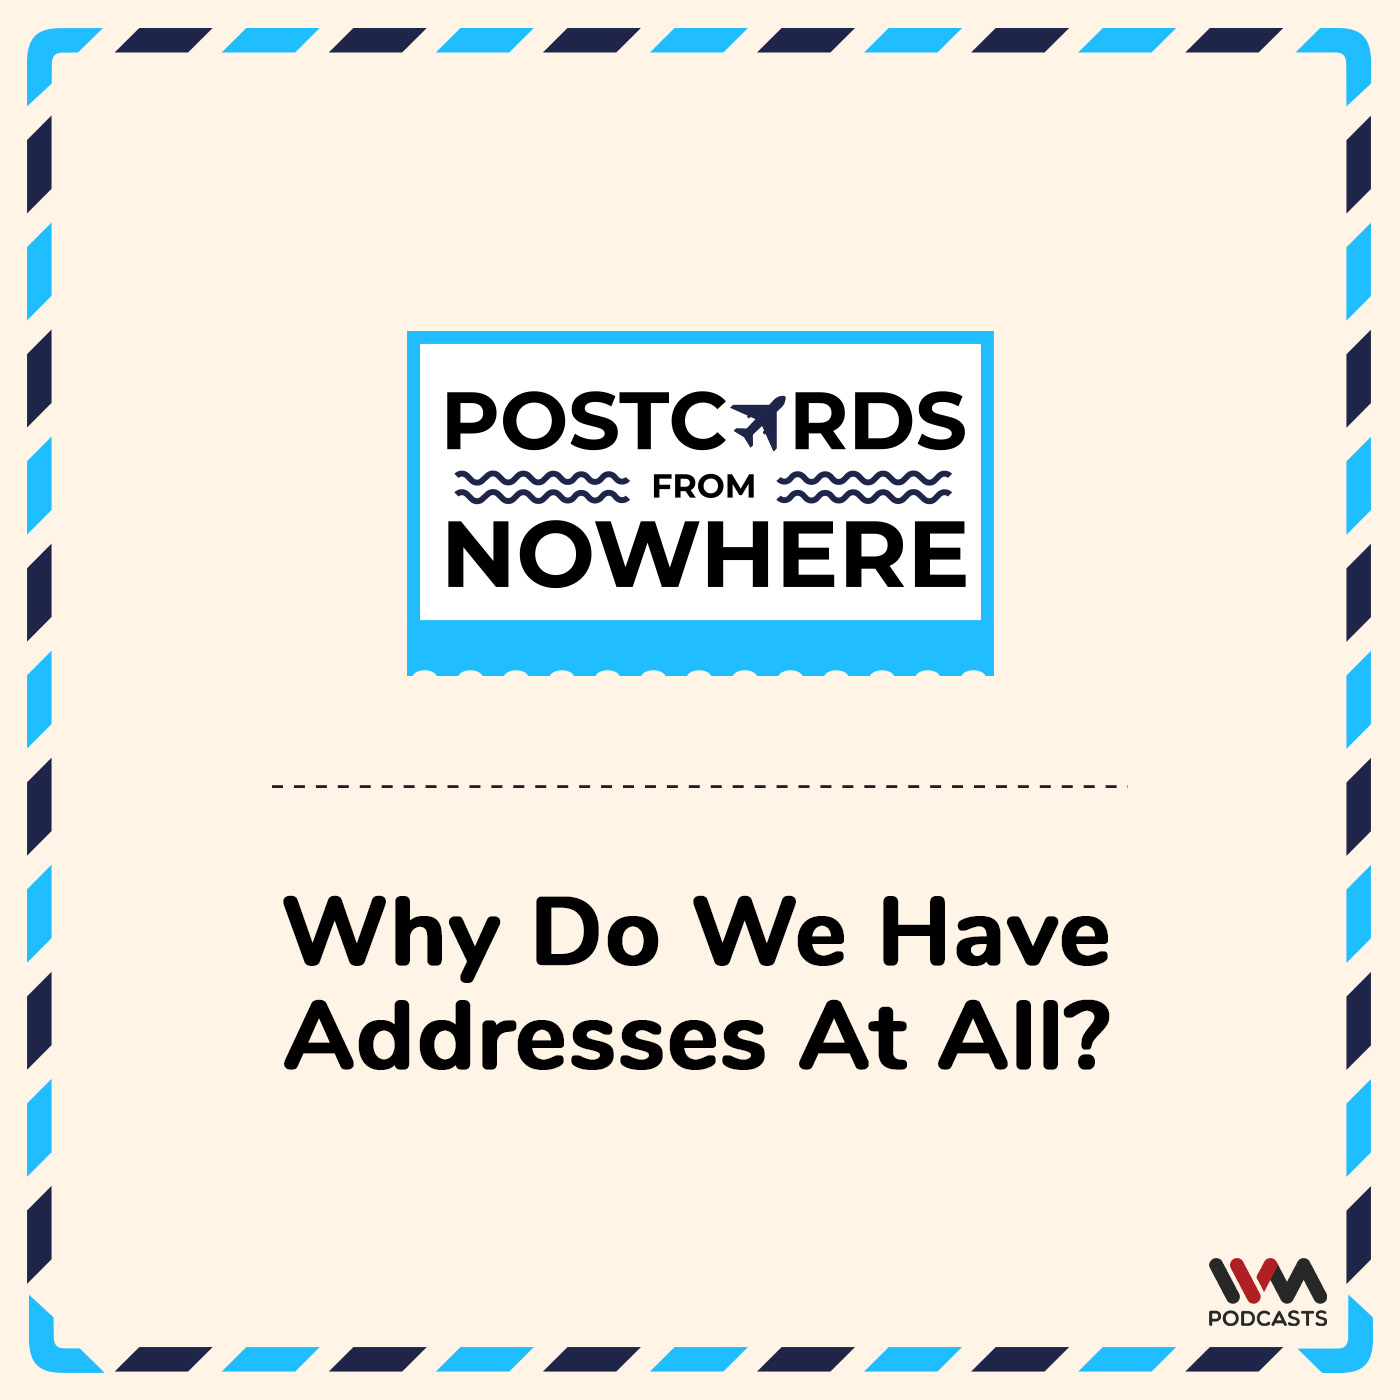 Why do we have Addresses at all?